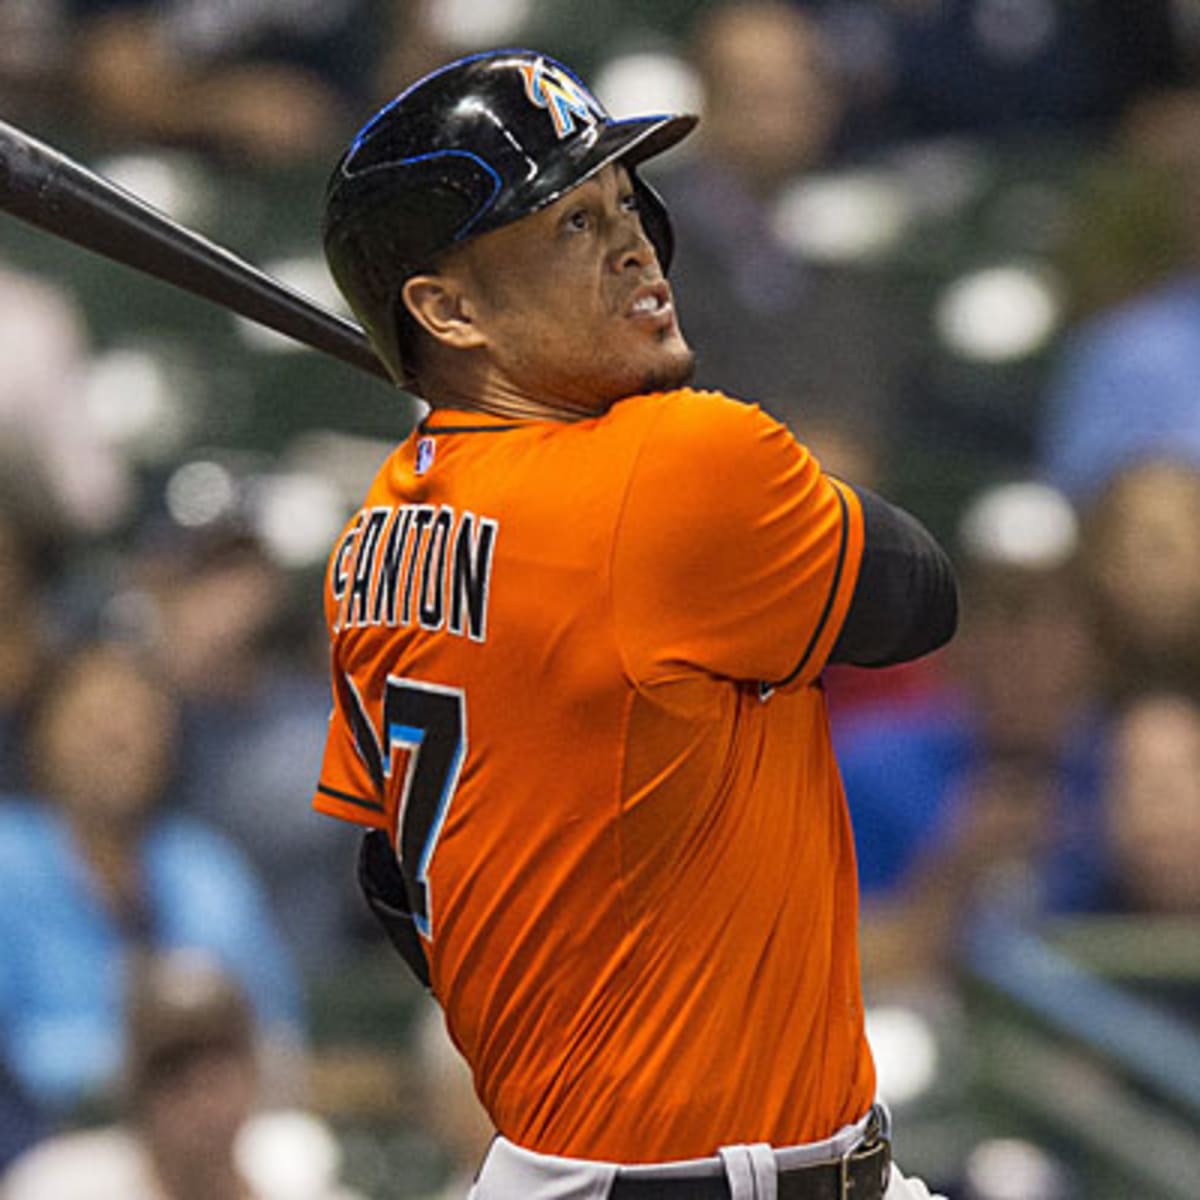 Meet Giancarlo Stanton, Little Known Ball Player Who Signed $325